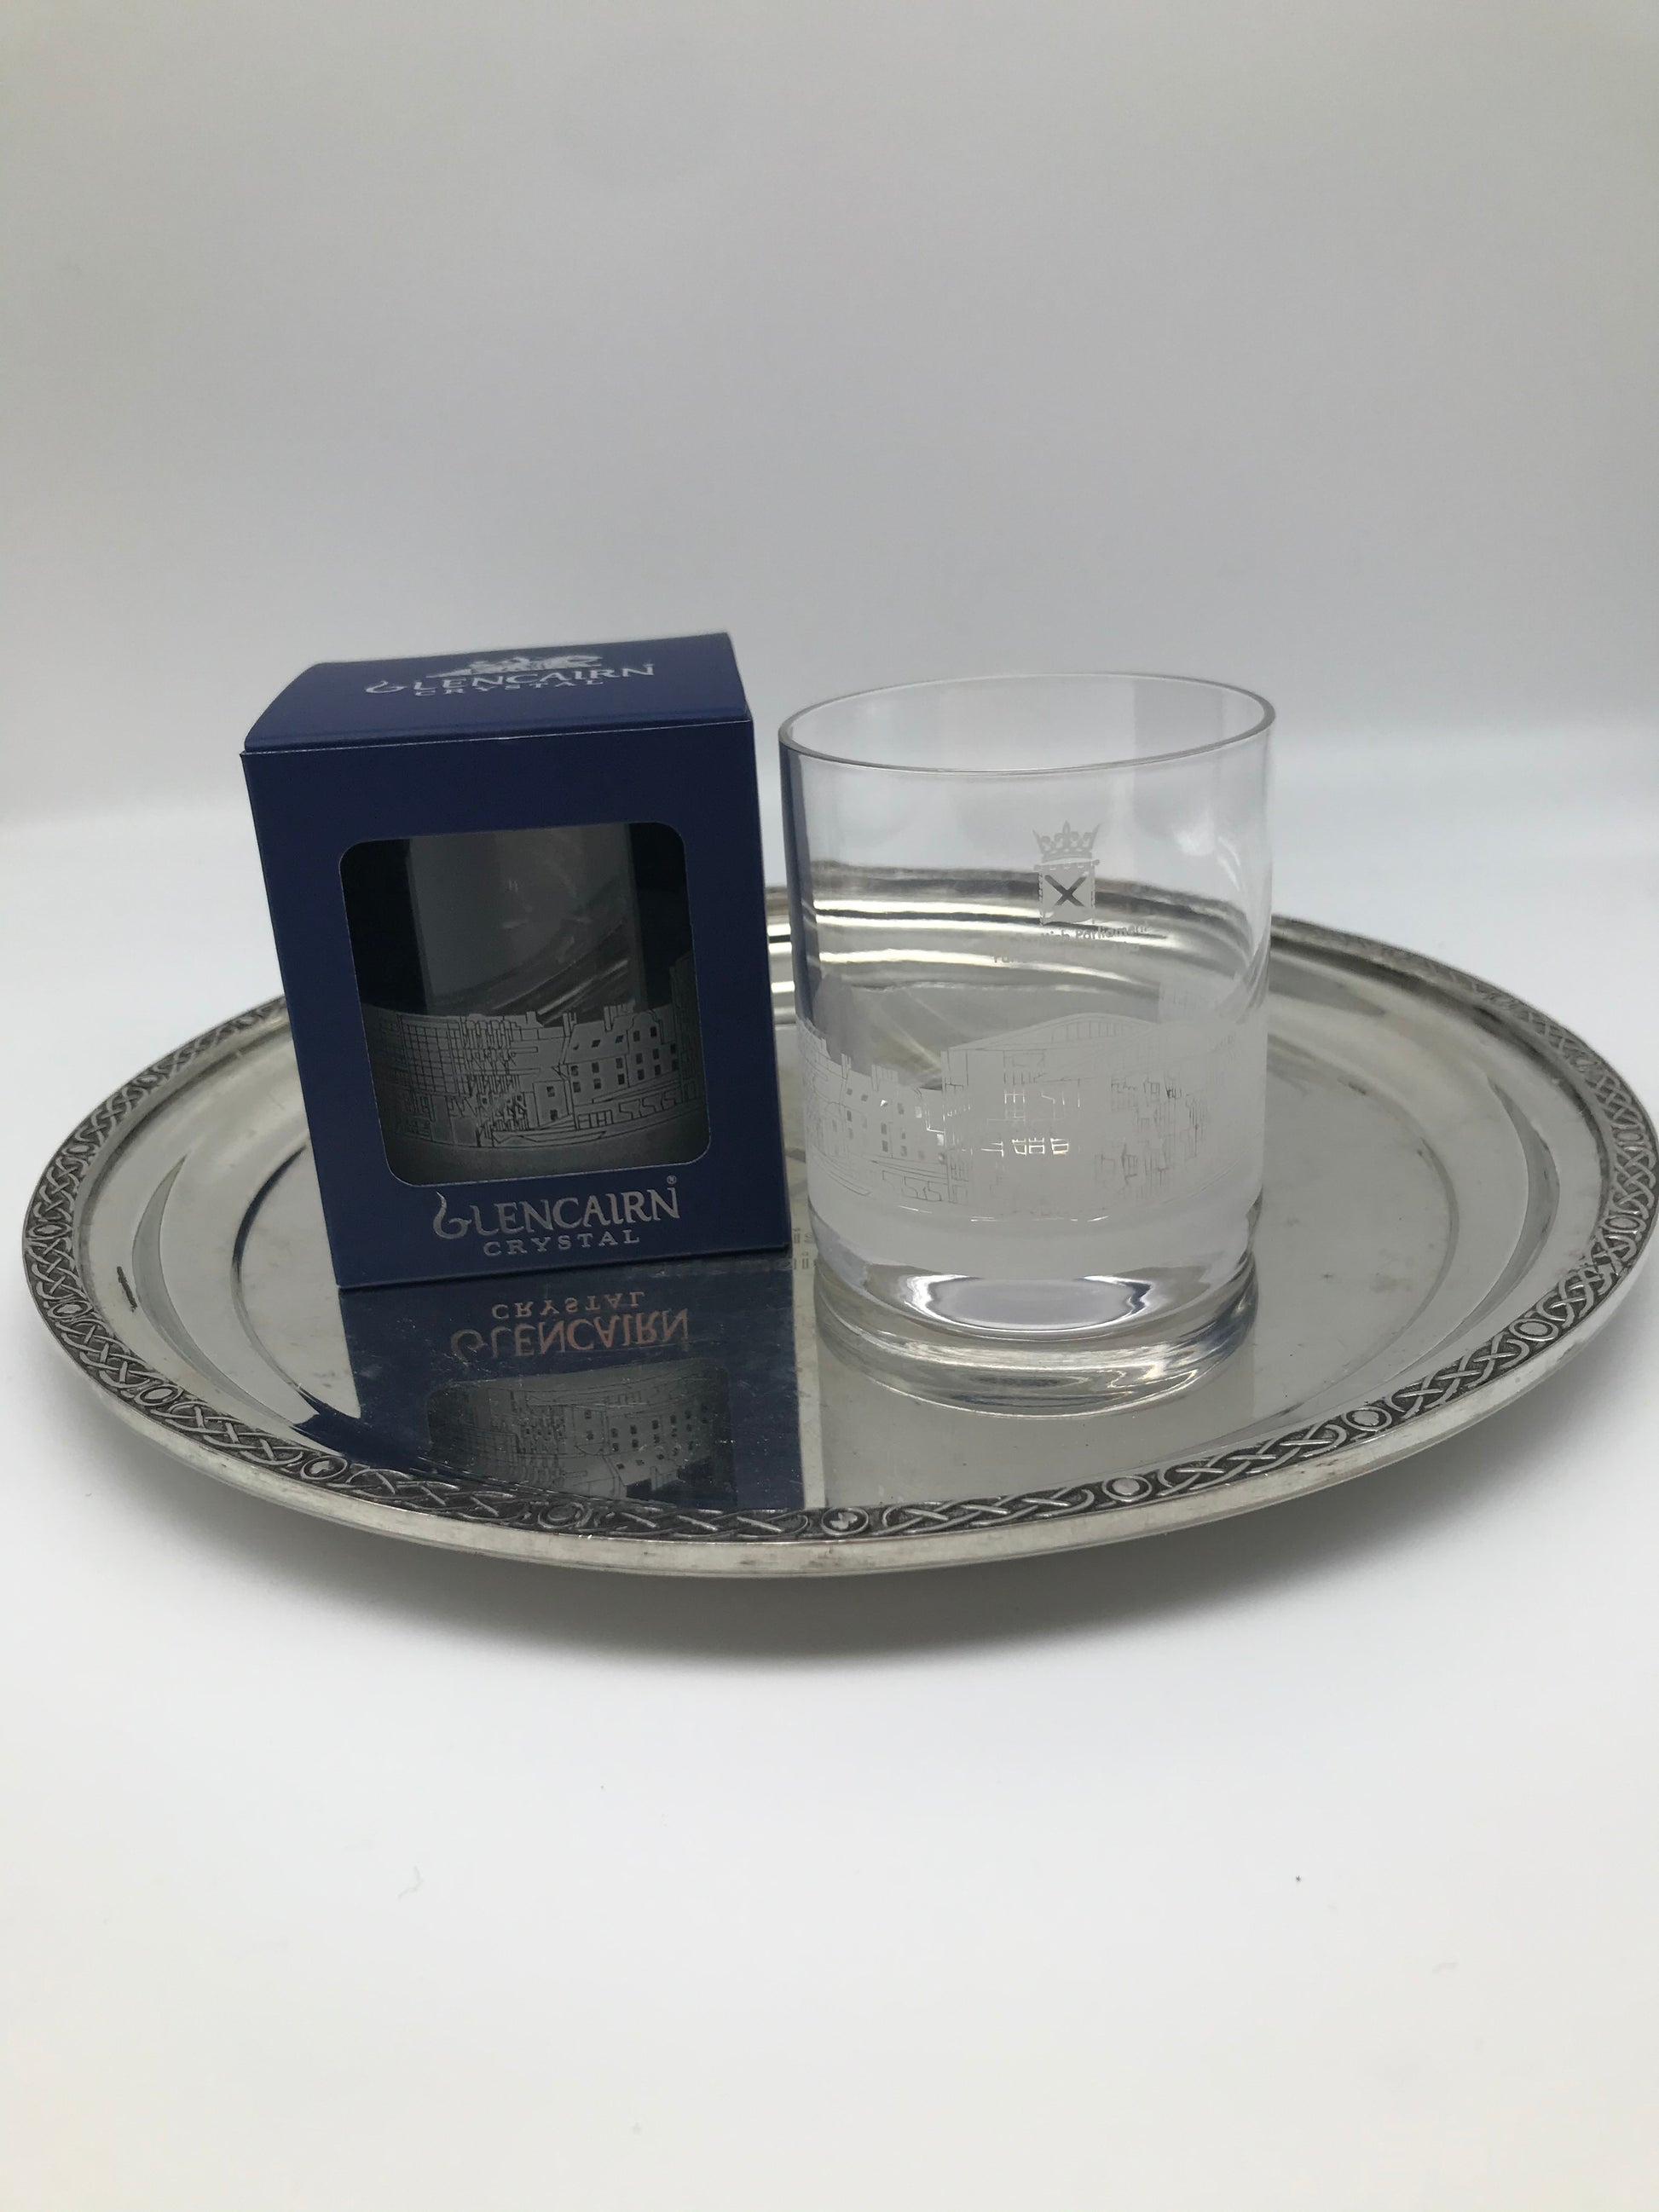 Two glasses, one in the box and one without it placed on a silver metal tray.